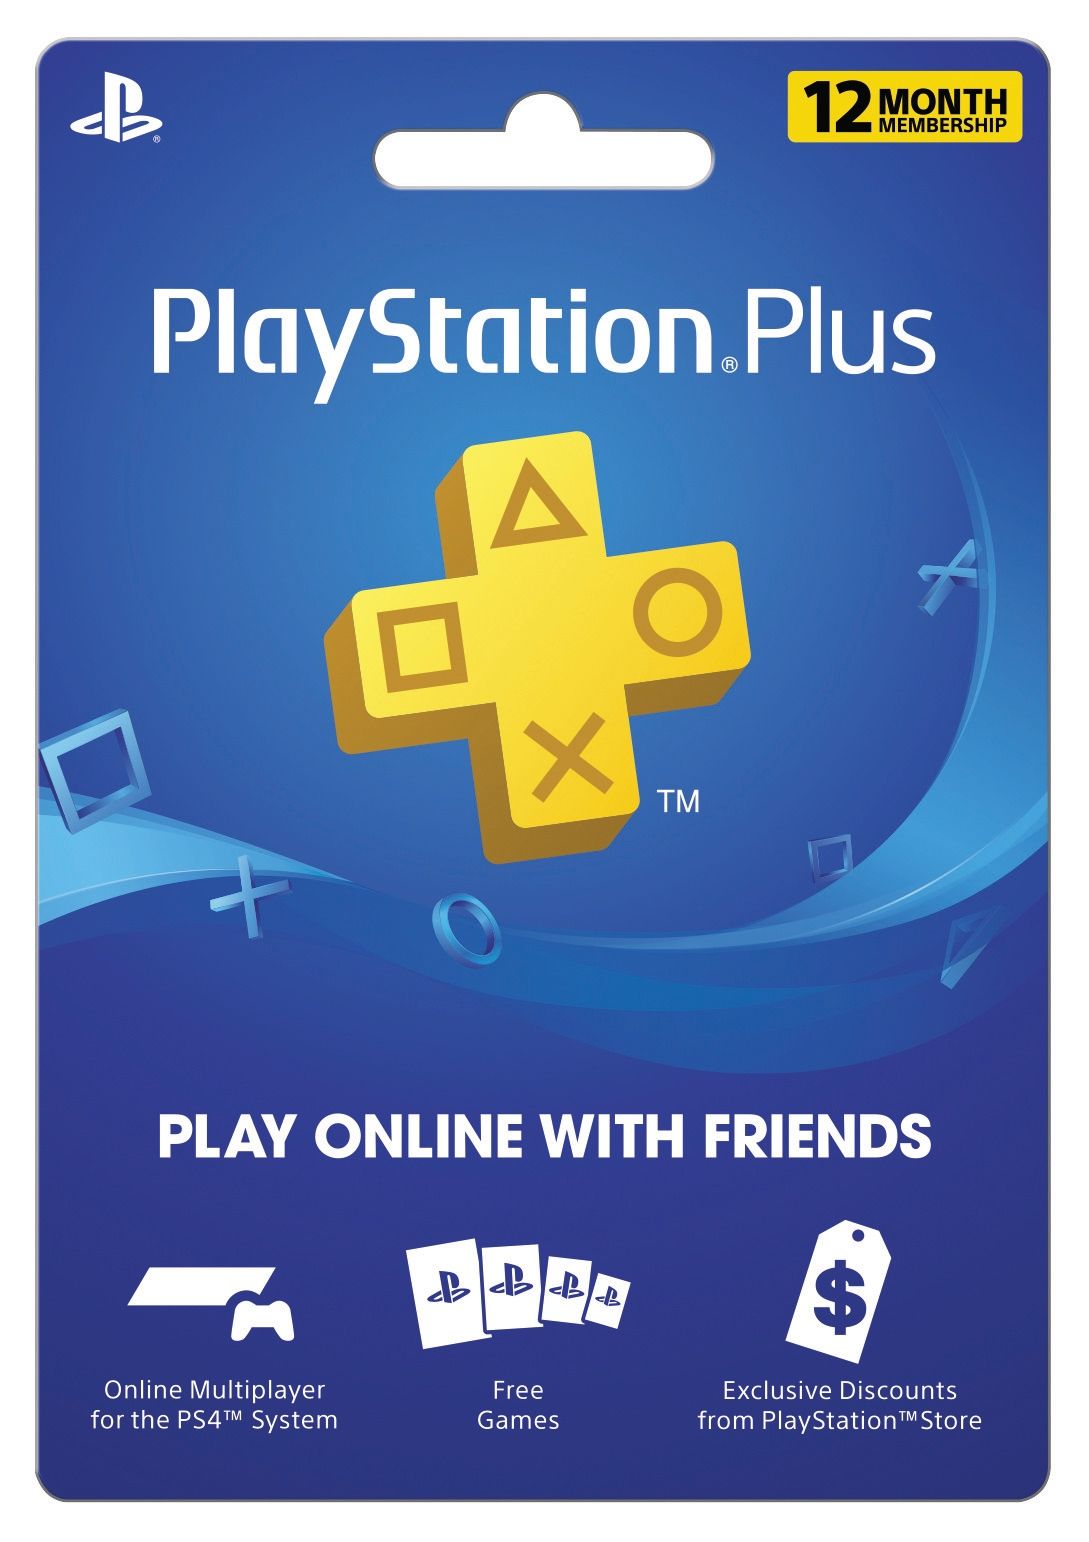 Get 12 months of PlayStation Plus for just 45 at Walmart